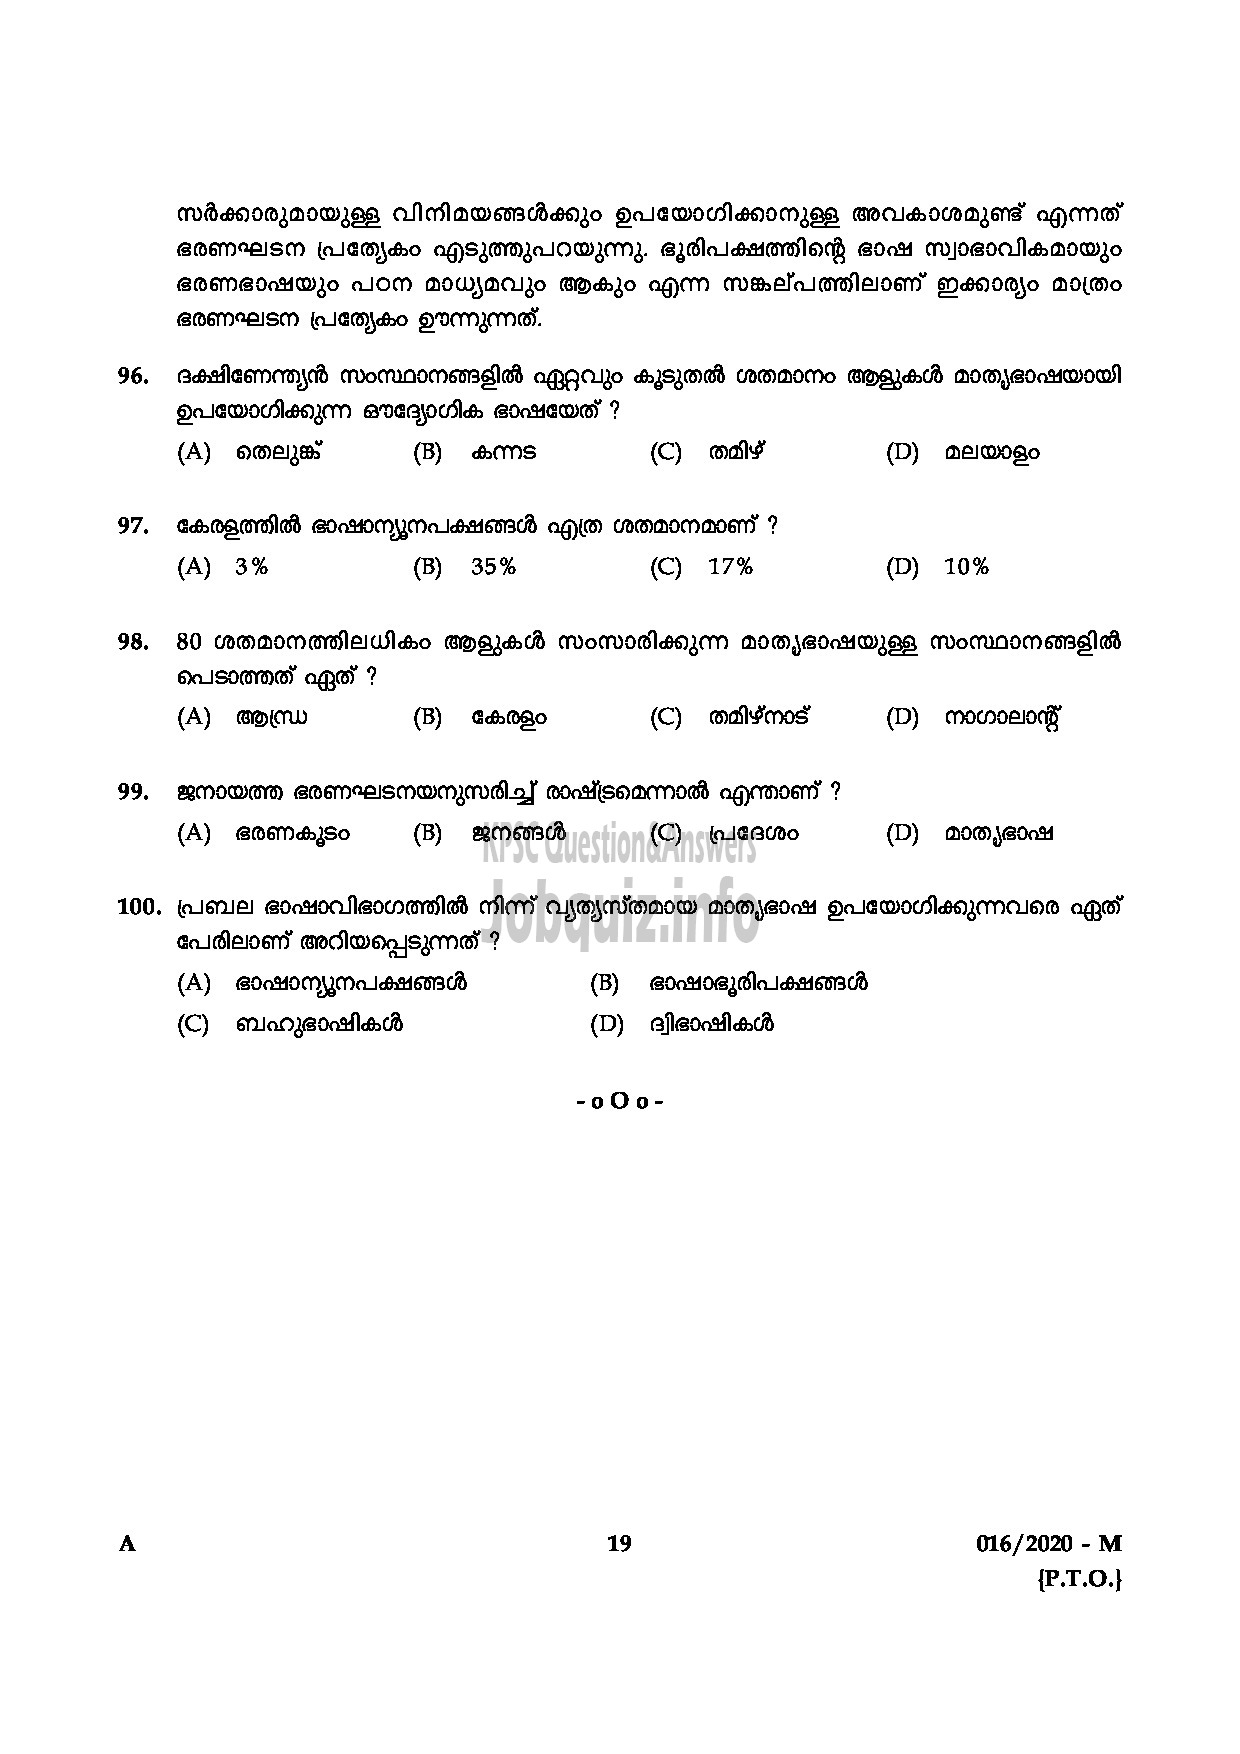 Kerala PSC Question Paper - KAS OFFICER (JUNIOR TIME SCALE) TRAINEE KERALA ADMINISTRATIVE SERVICE-19